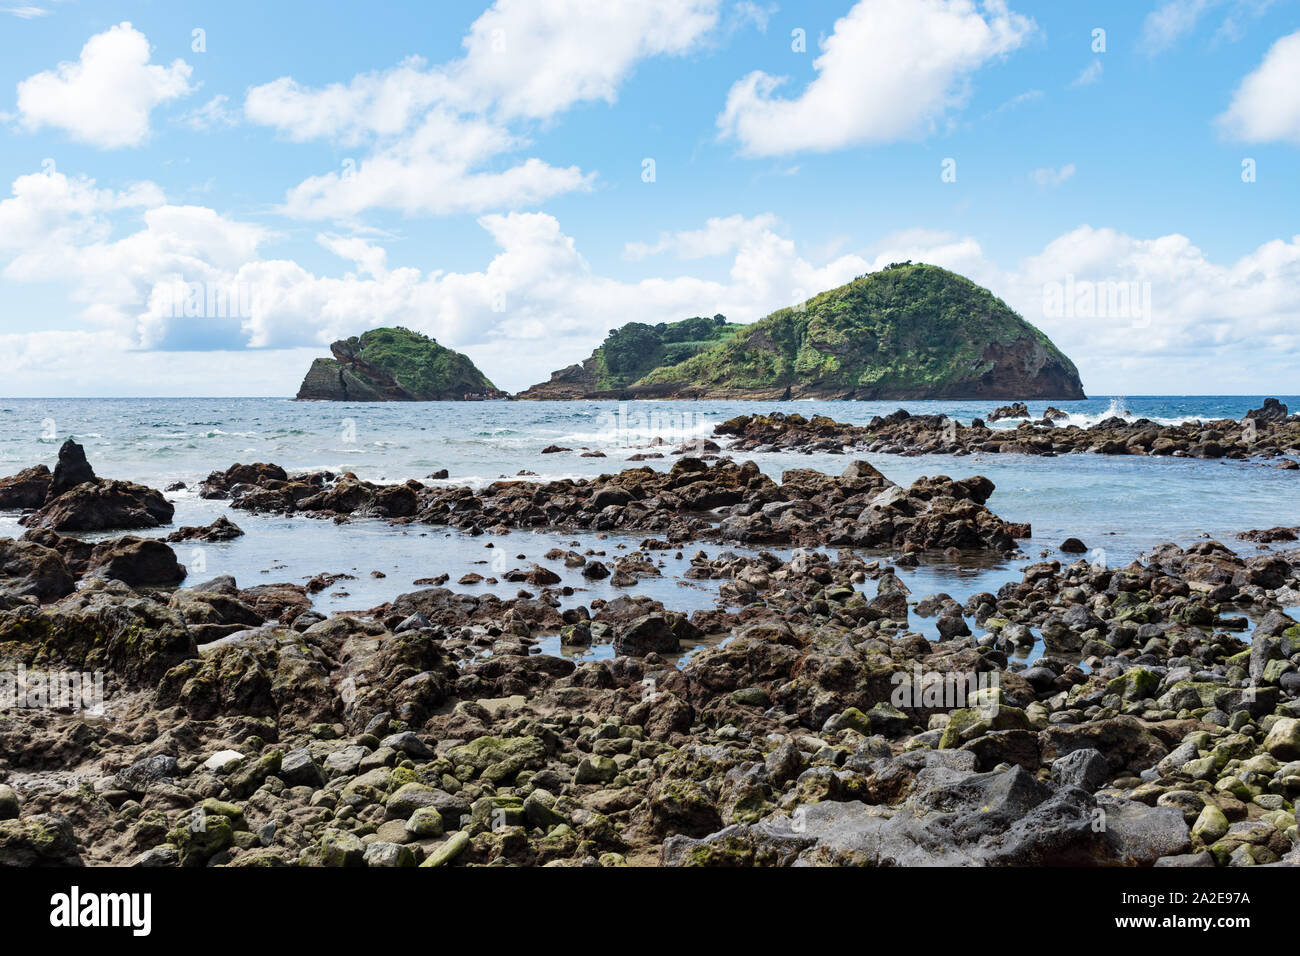 View of the Islet of Vila Franca do Campo from a volcanic lava rock beach on the southern coast of São Miguel Island in the Azores. Stock Photo